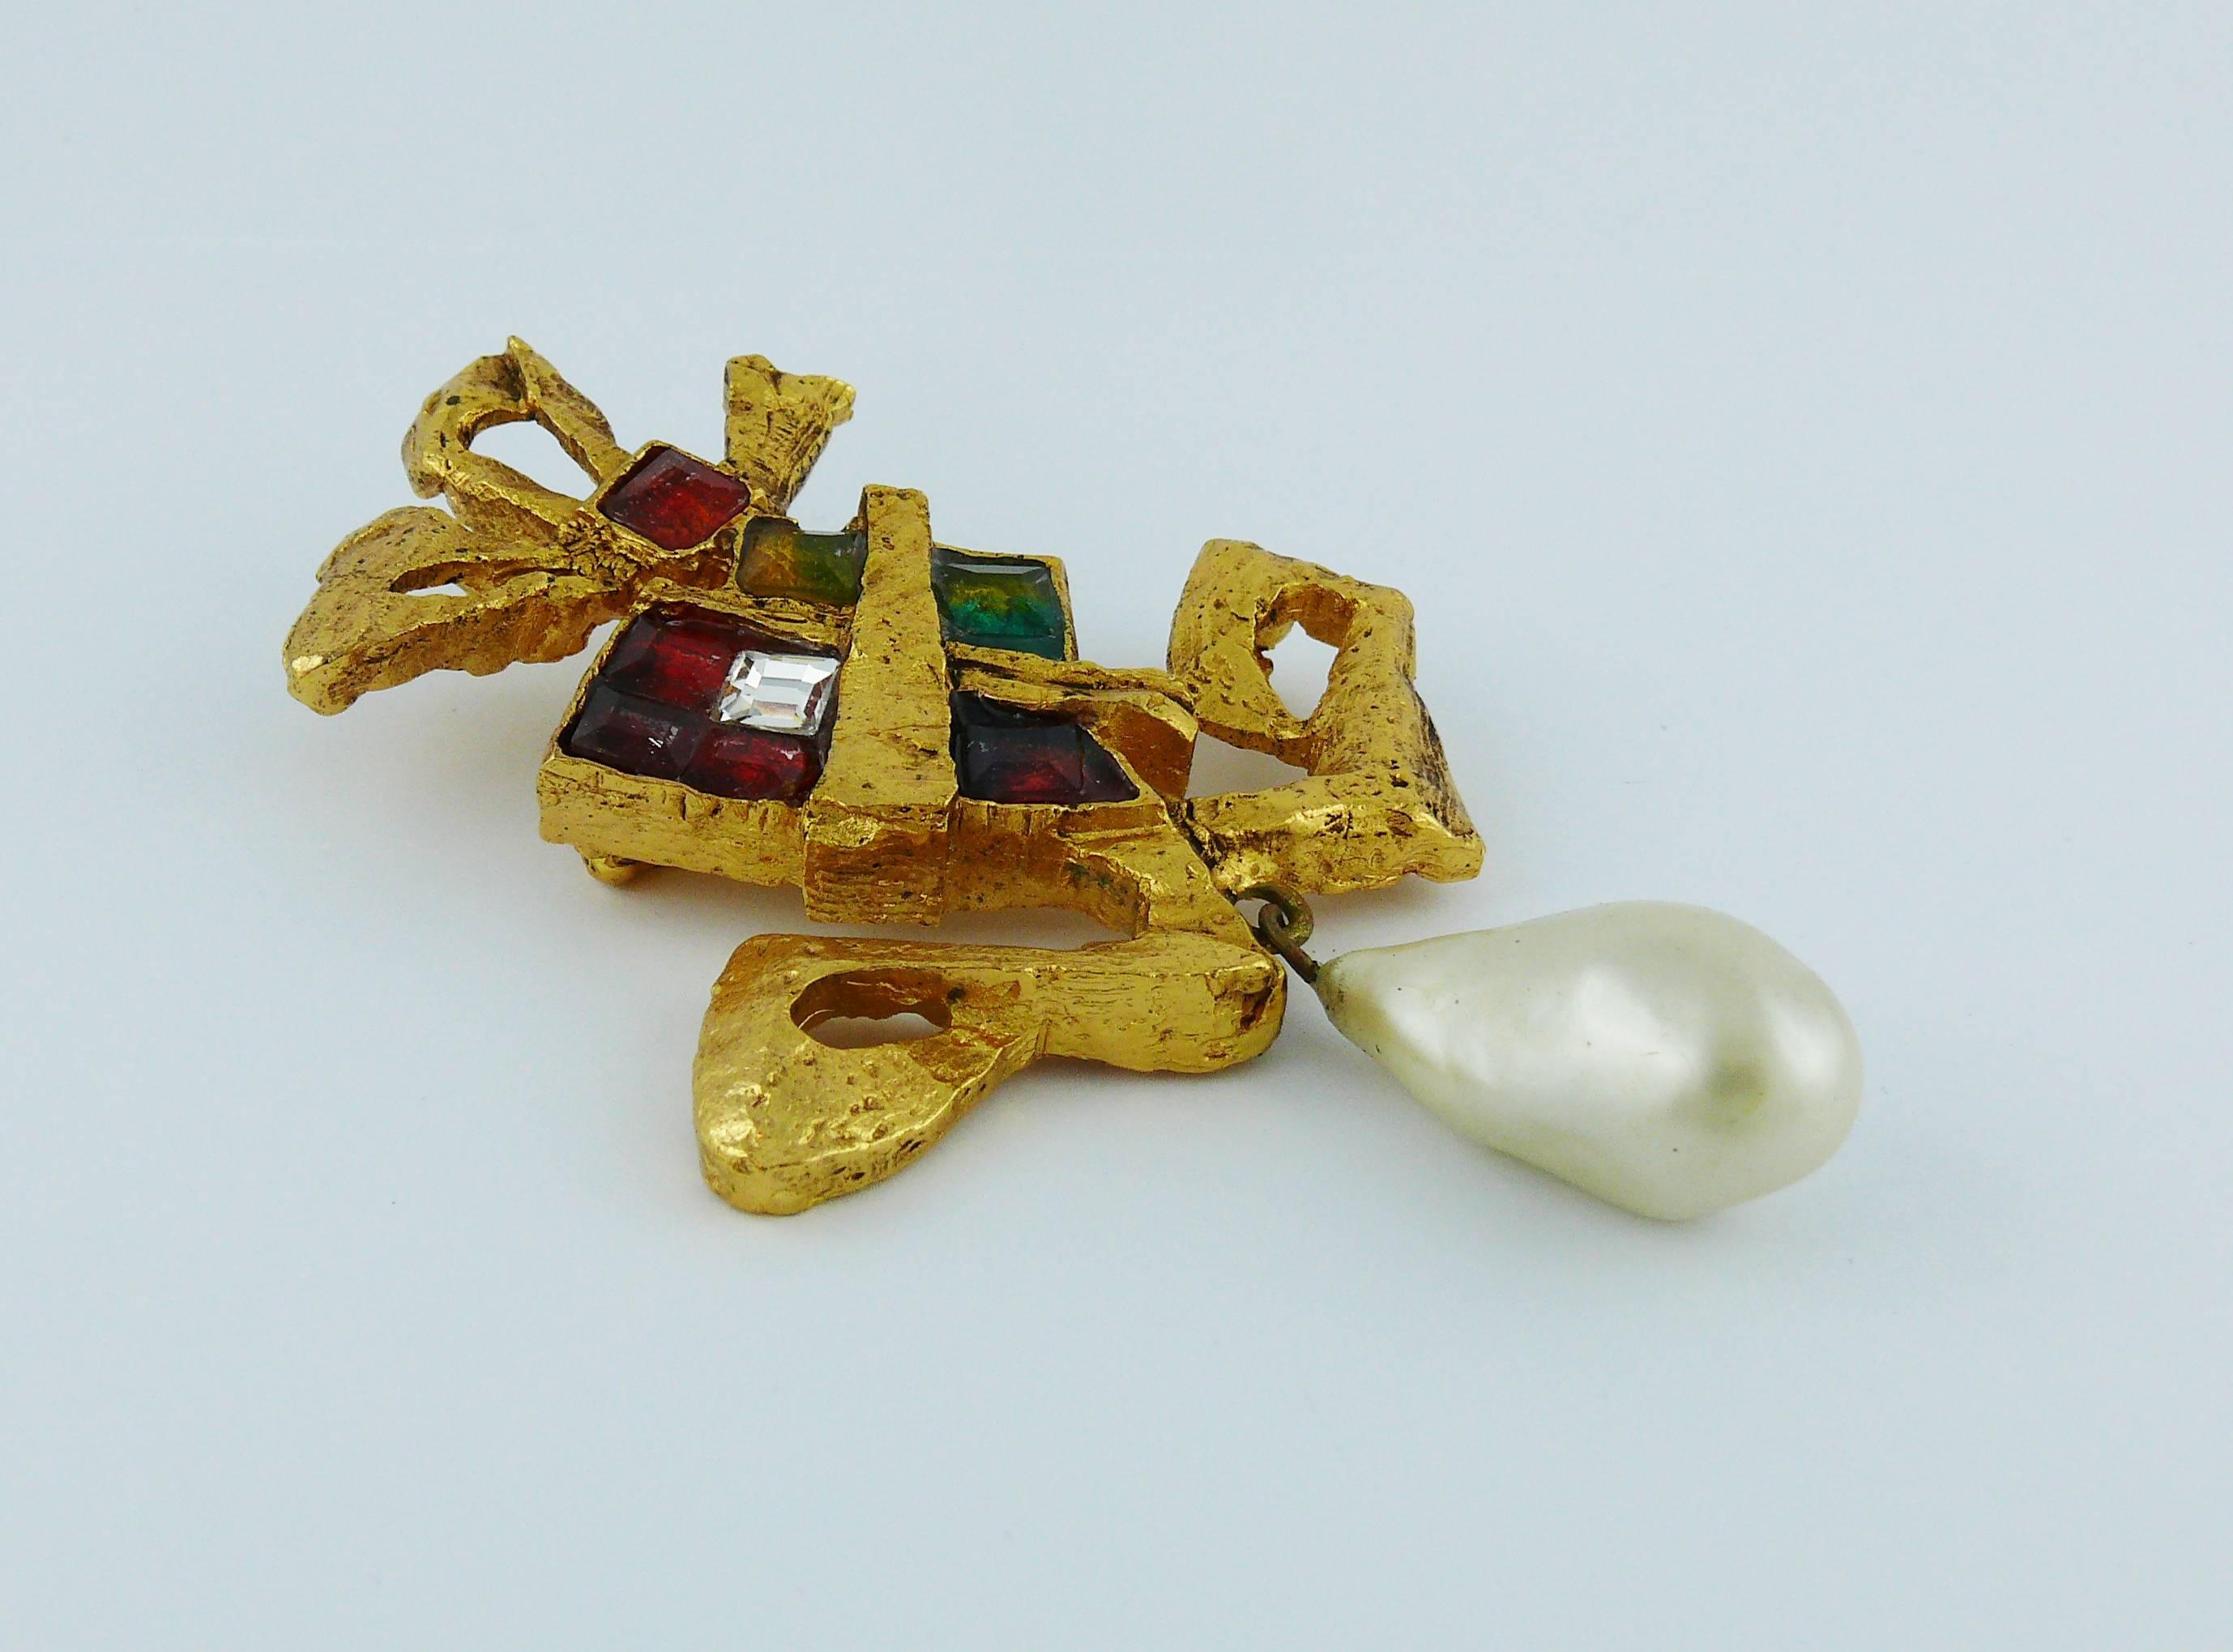 CHRISTIAN LACROIX vintage massive gold tone textured brooch featuring multicolored crystals embellishement a a large faux pearl drop.

From the "RAINBOW" jewelry collection.

Marked CHRISTIAN LACROIX CL Made in France.

Indicative